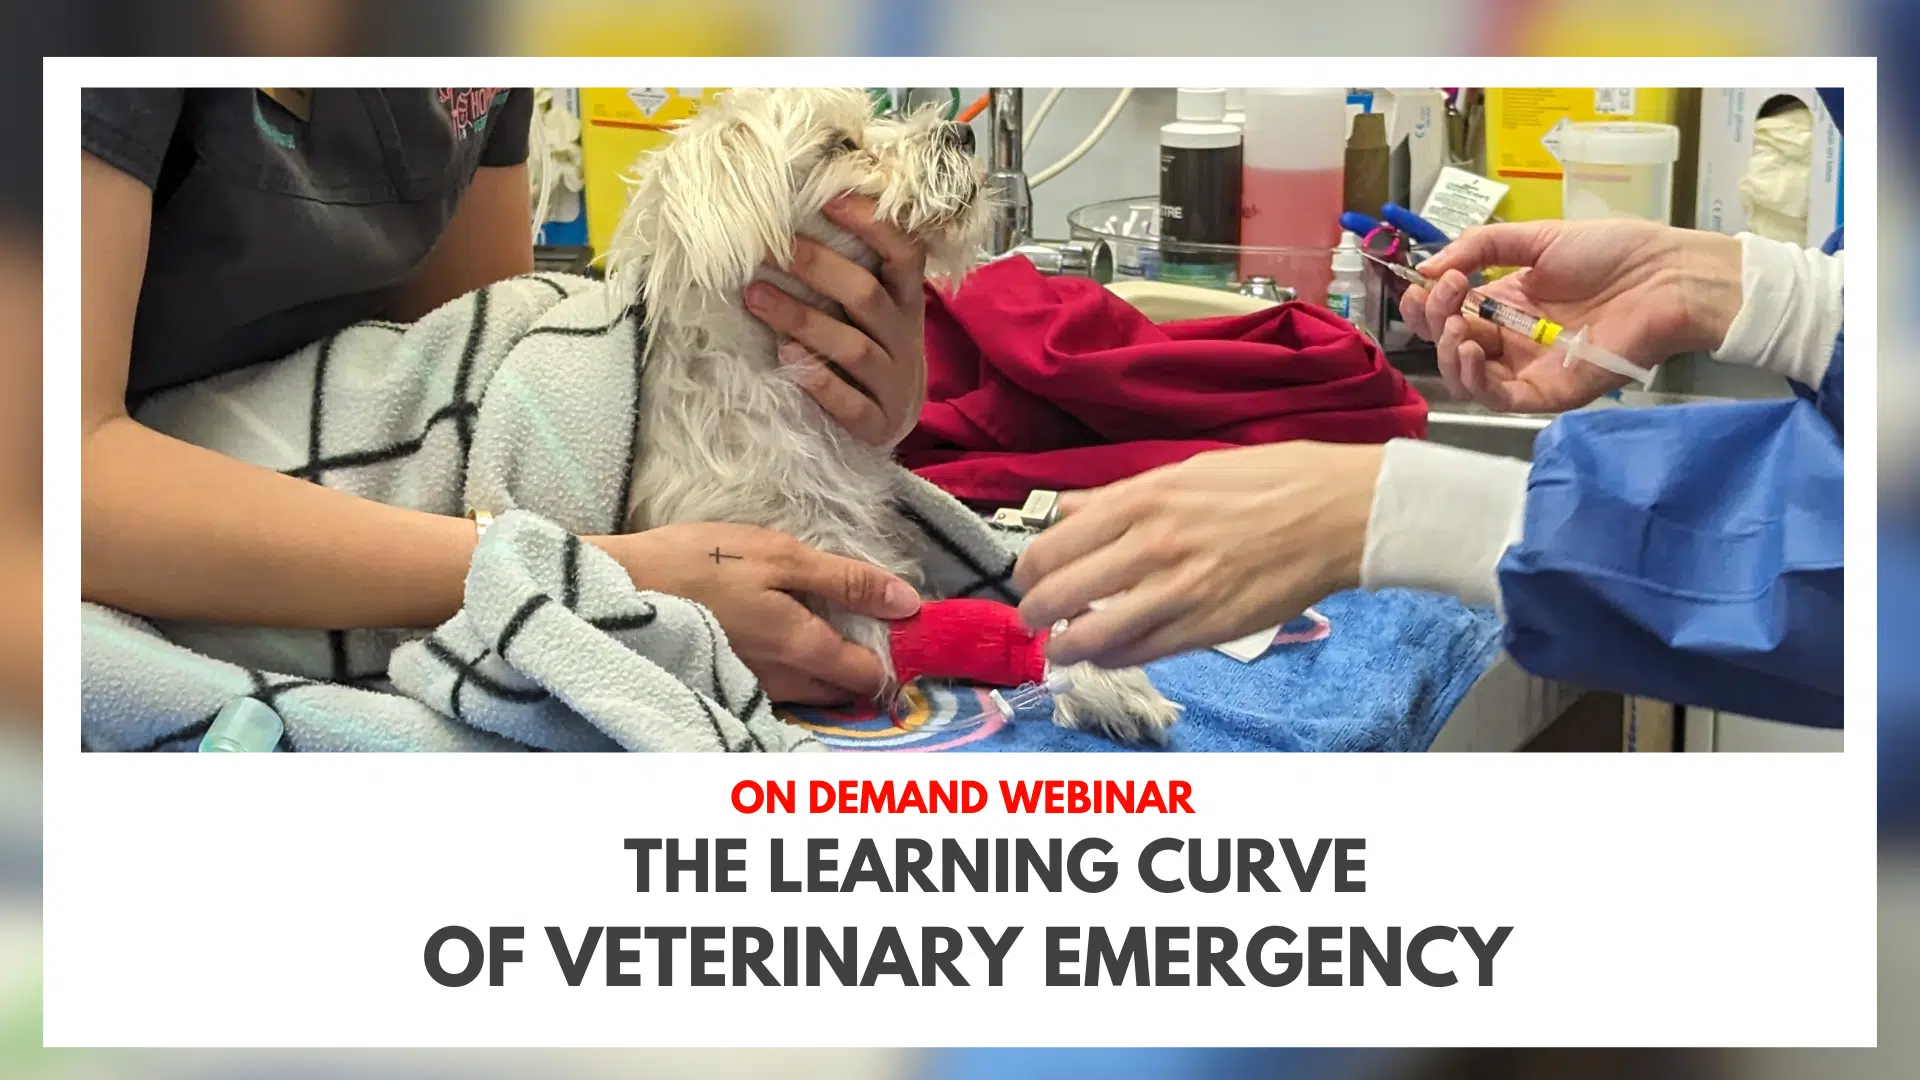 The Learning Curve of veterinary emergency